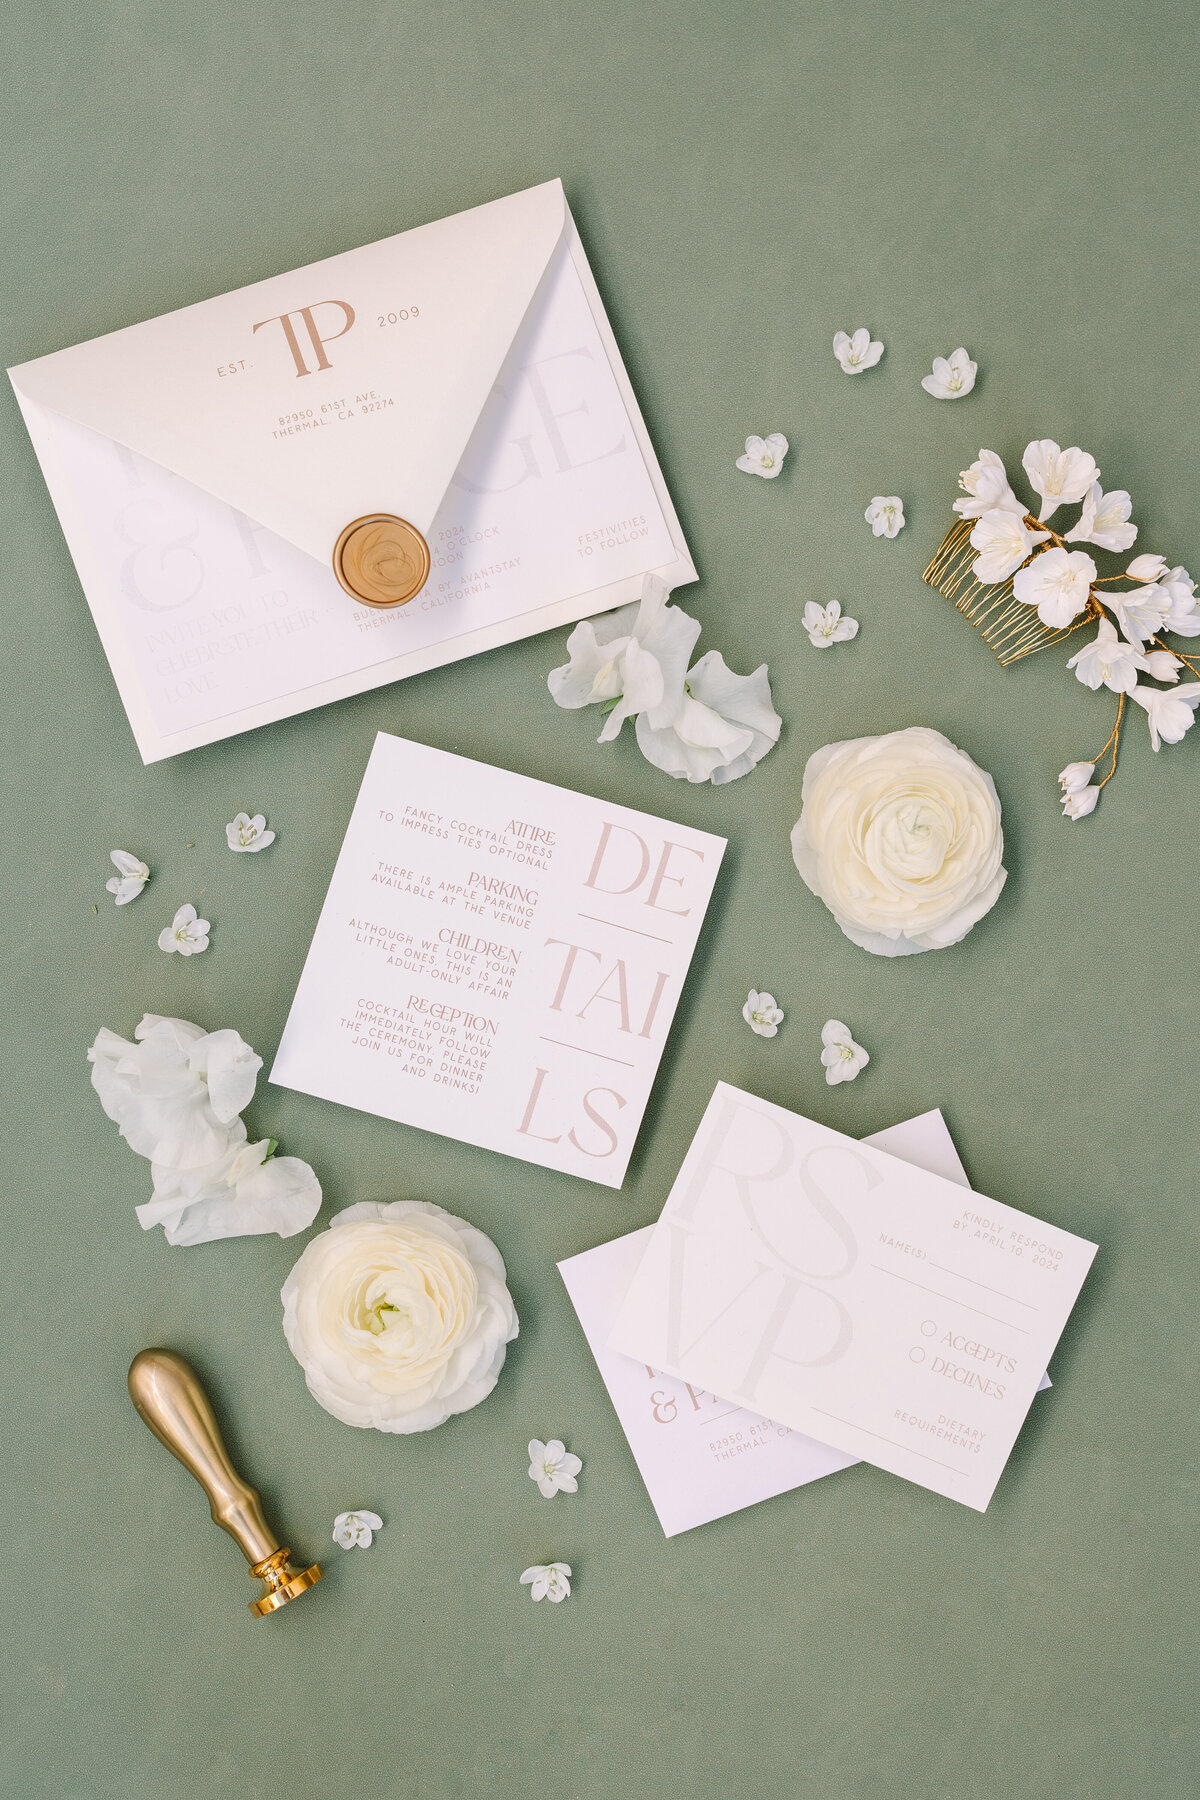 flat lay image of napa wedding invitation with sprinkled flowers and green background.